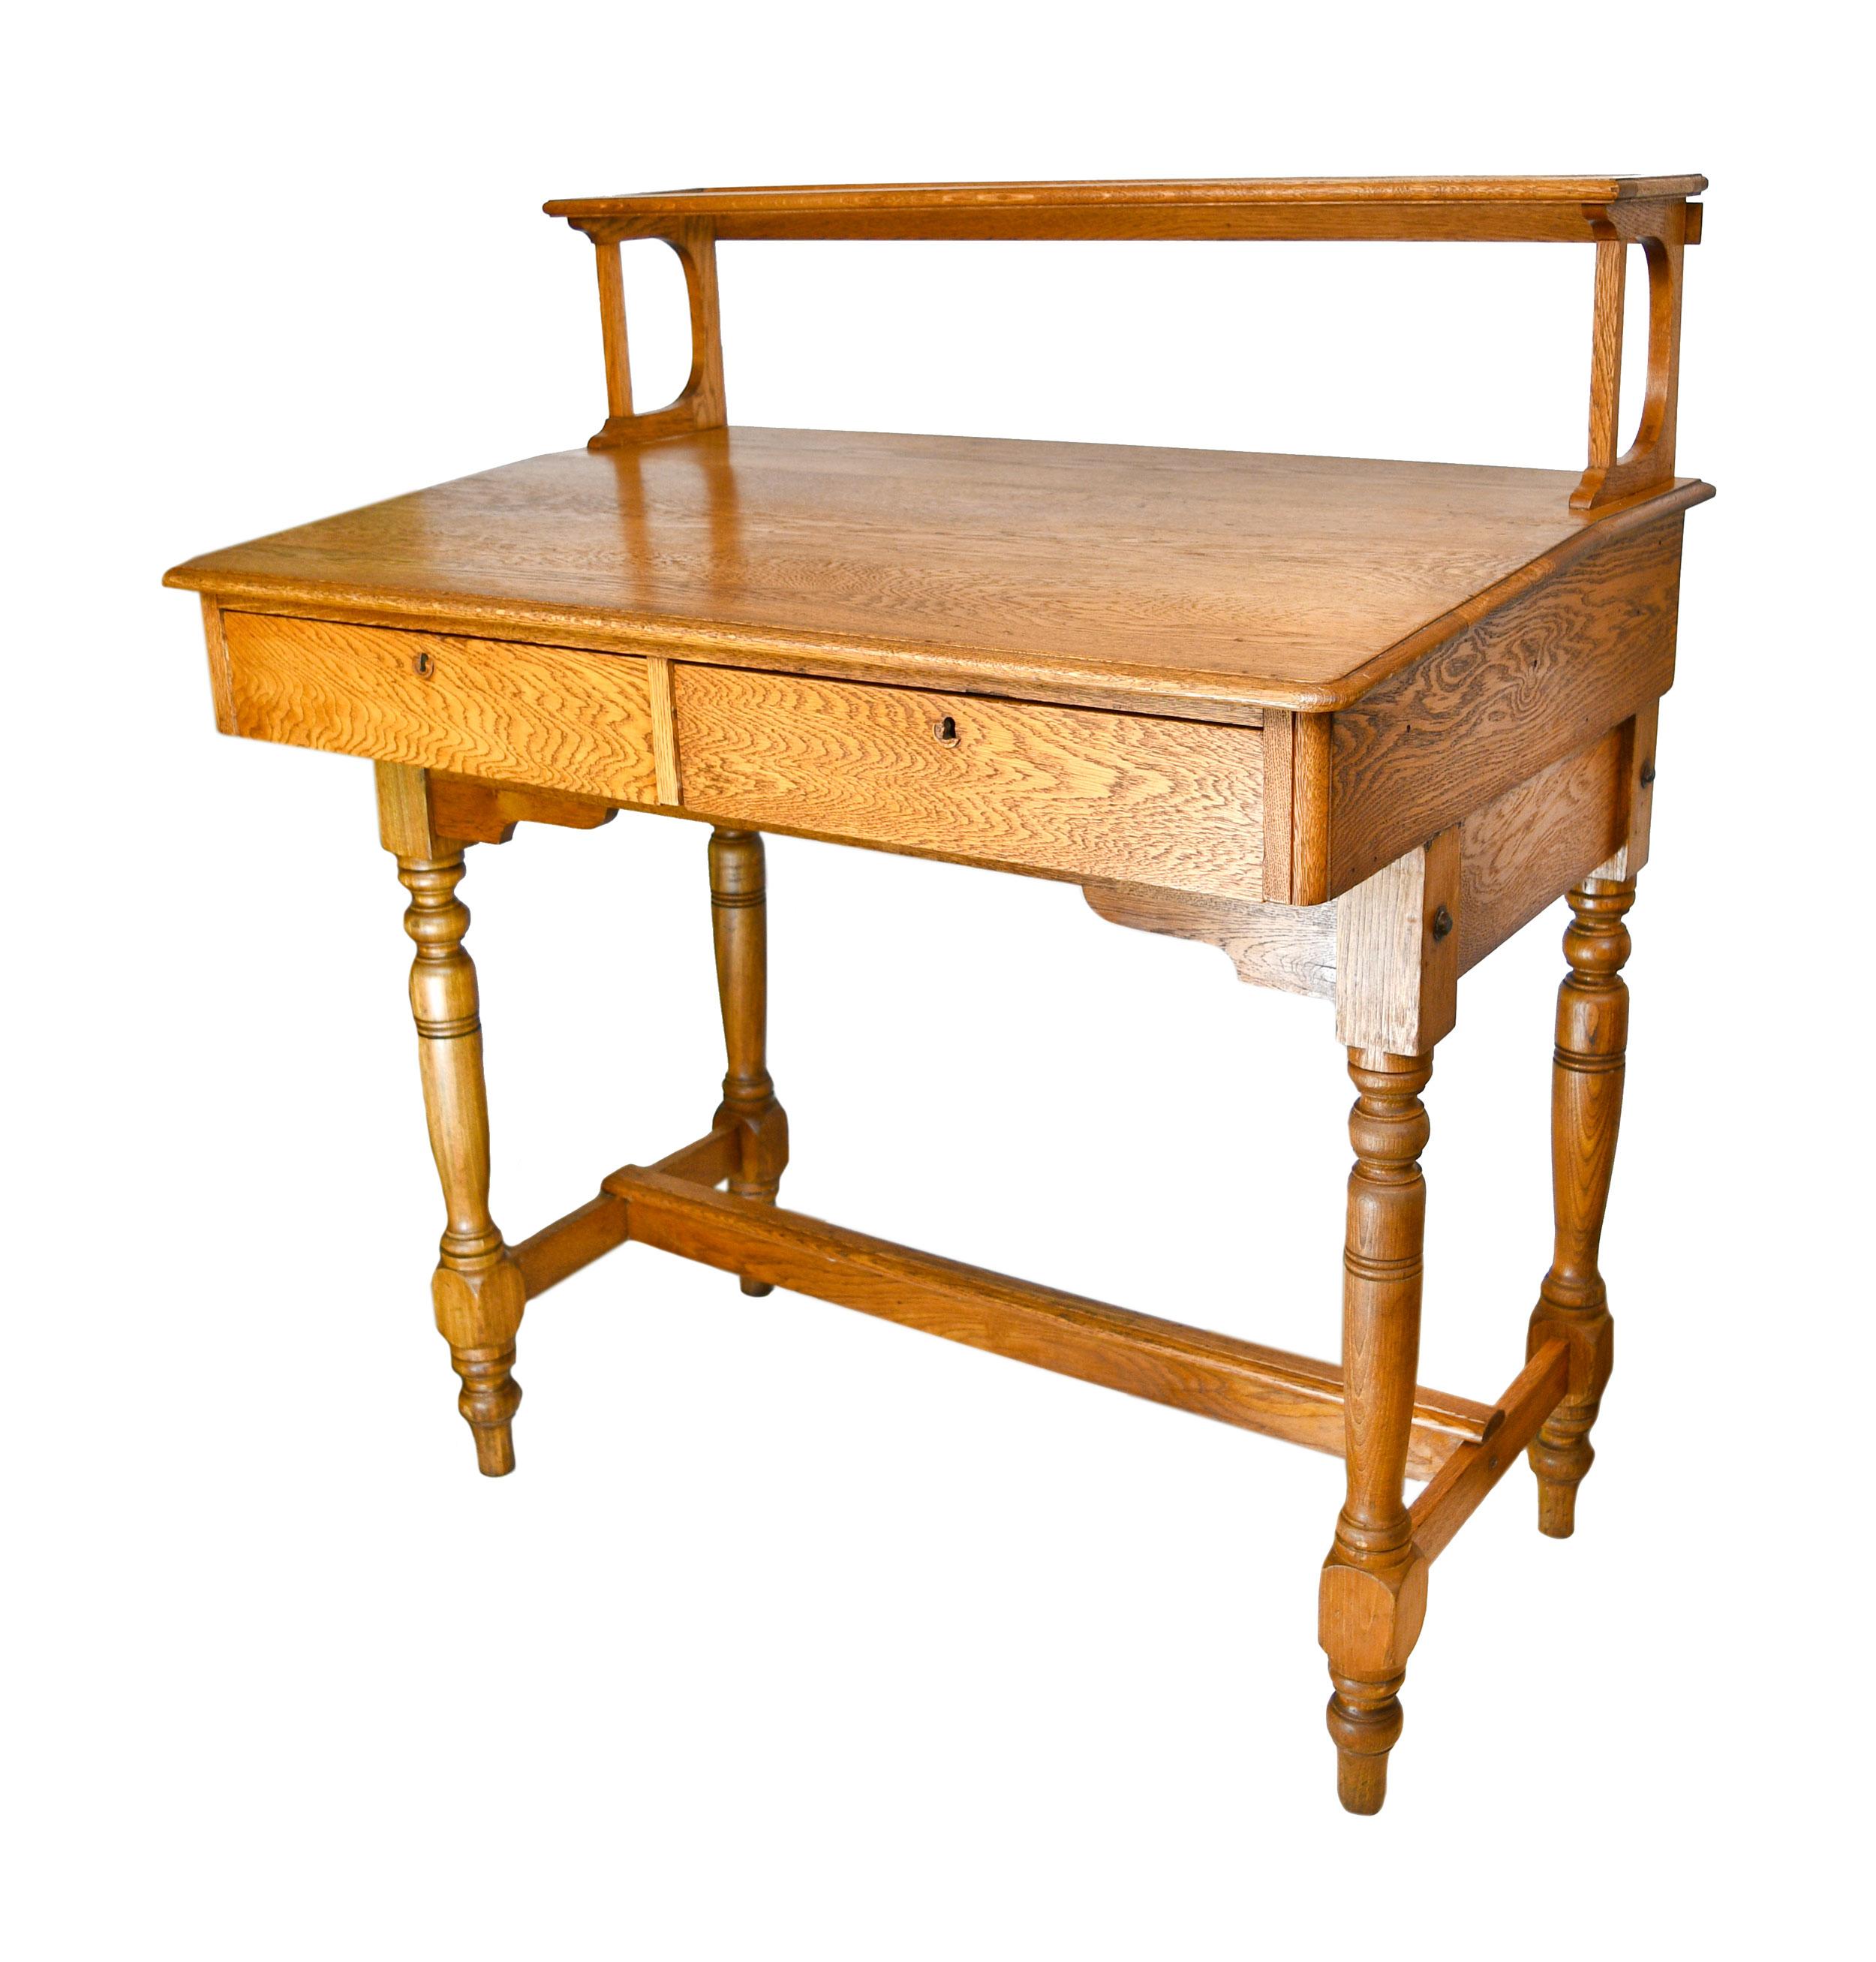 This gorgeous standing desk is made of lovely oak and features two large drawers. The richness of the wood grain on this desk needs to be seen to believe!

Measures: 48” wide x 33” deep x 44” tall (upper shelf adds 11” to the height)

The desk